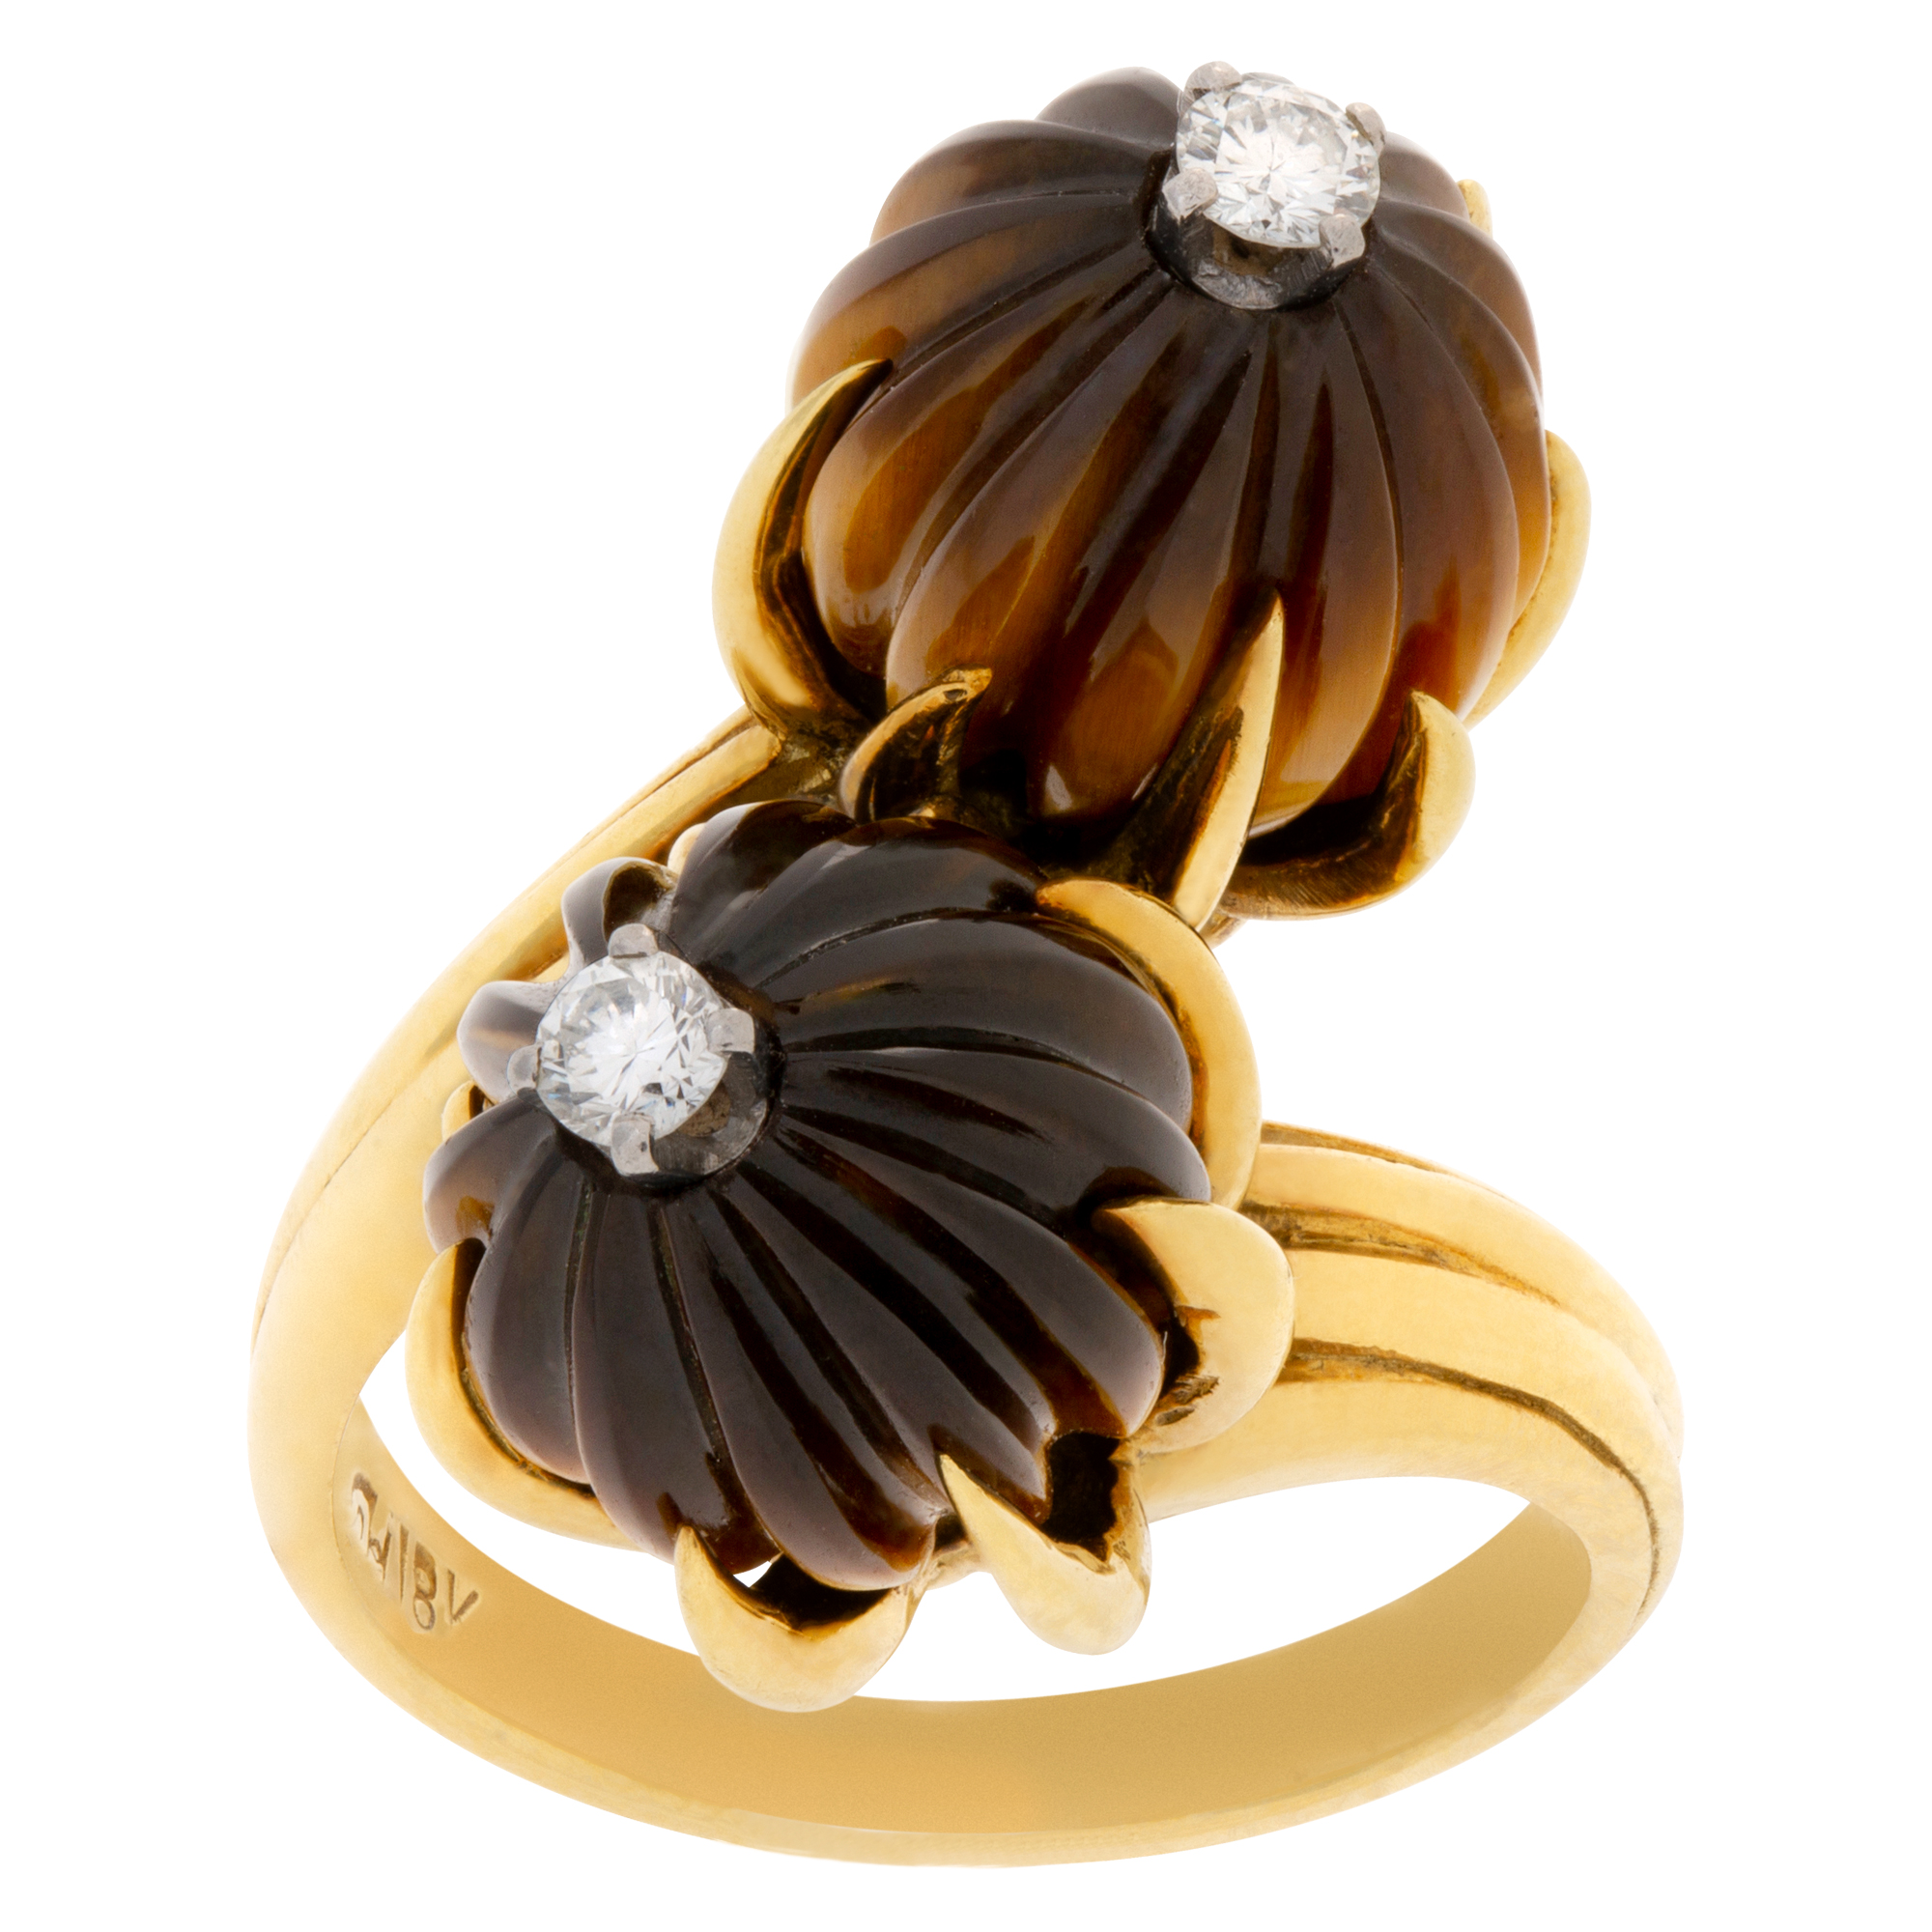 Magnificent tiger eye ring with diamond center in 18k yellow gold. Size 6 image 1